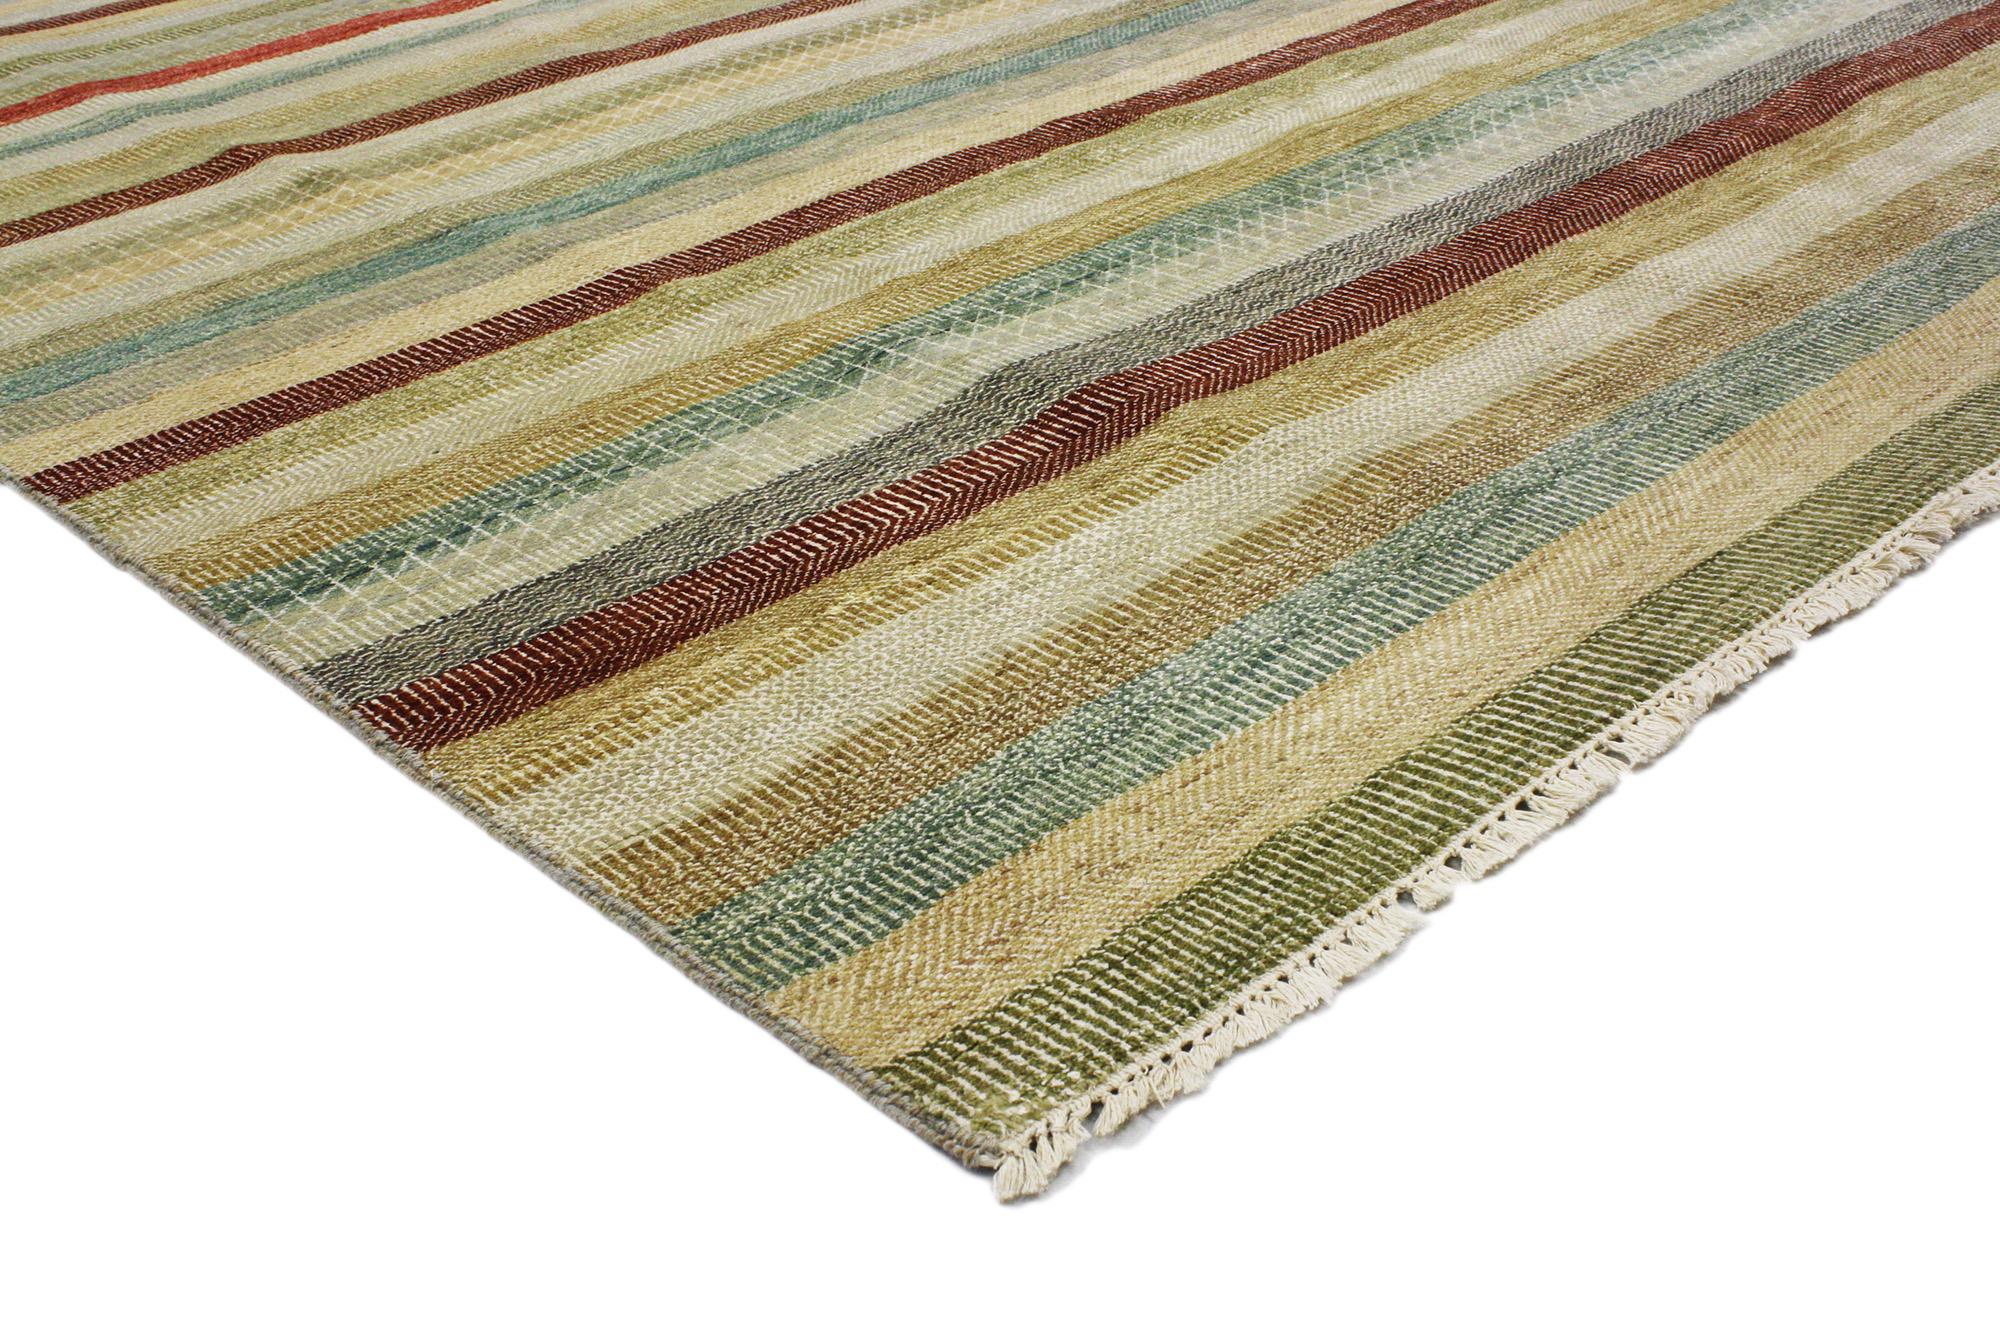 30282 Transitional Indian Striped Rug, 06'00 X 08'07. 
Emanating classic style with incredible detail and texture, this transitional striped Indian rug is a captivating vision of woven beauty. The show-stopping striped pattern and earth-tone colors